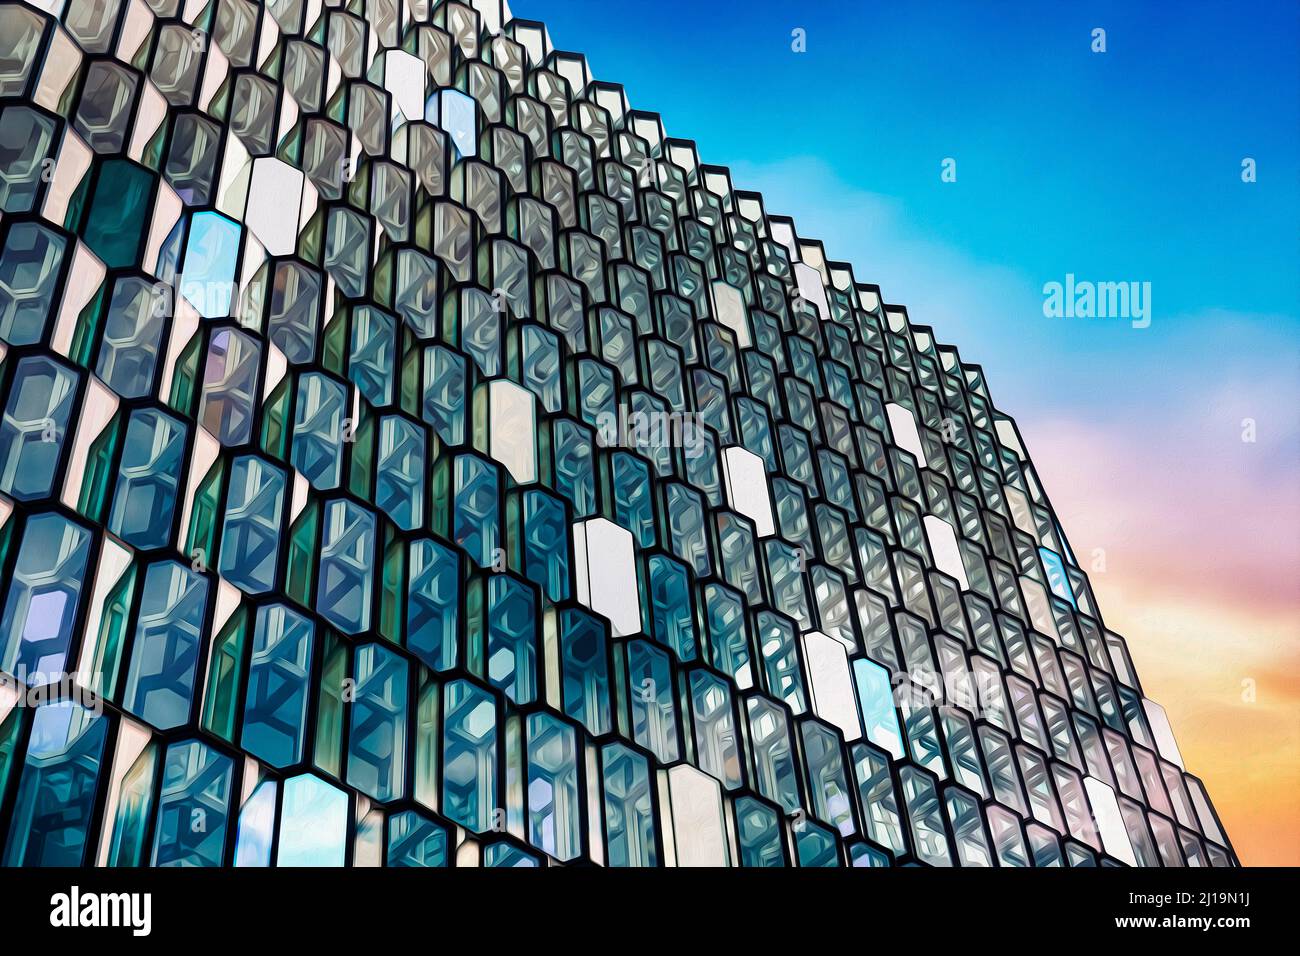 Detail of the glass facade, Harpa Concert Hall, architect Henning Larsen, facade by artist Olafur Eliasson, evening sky, coloured light Stock Photo